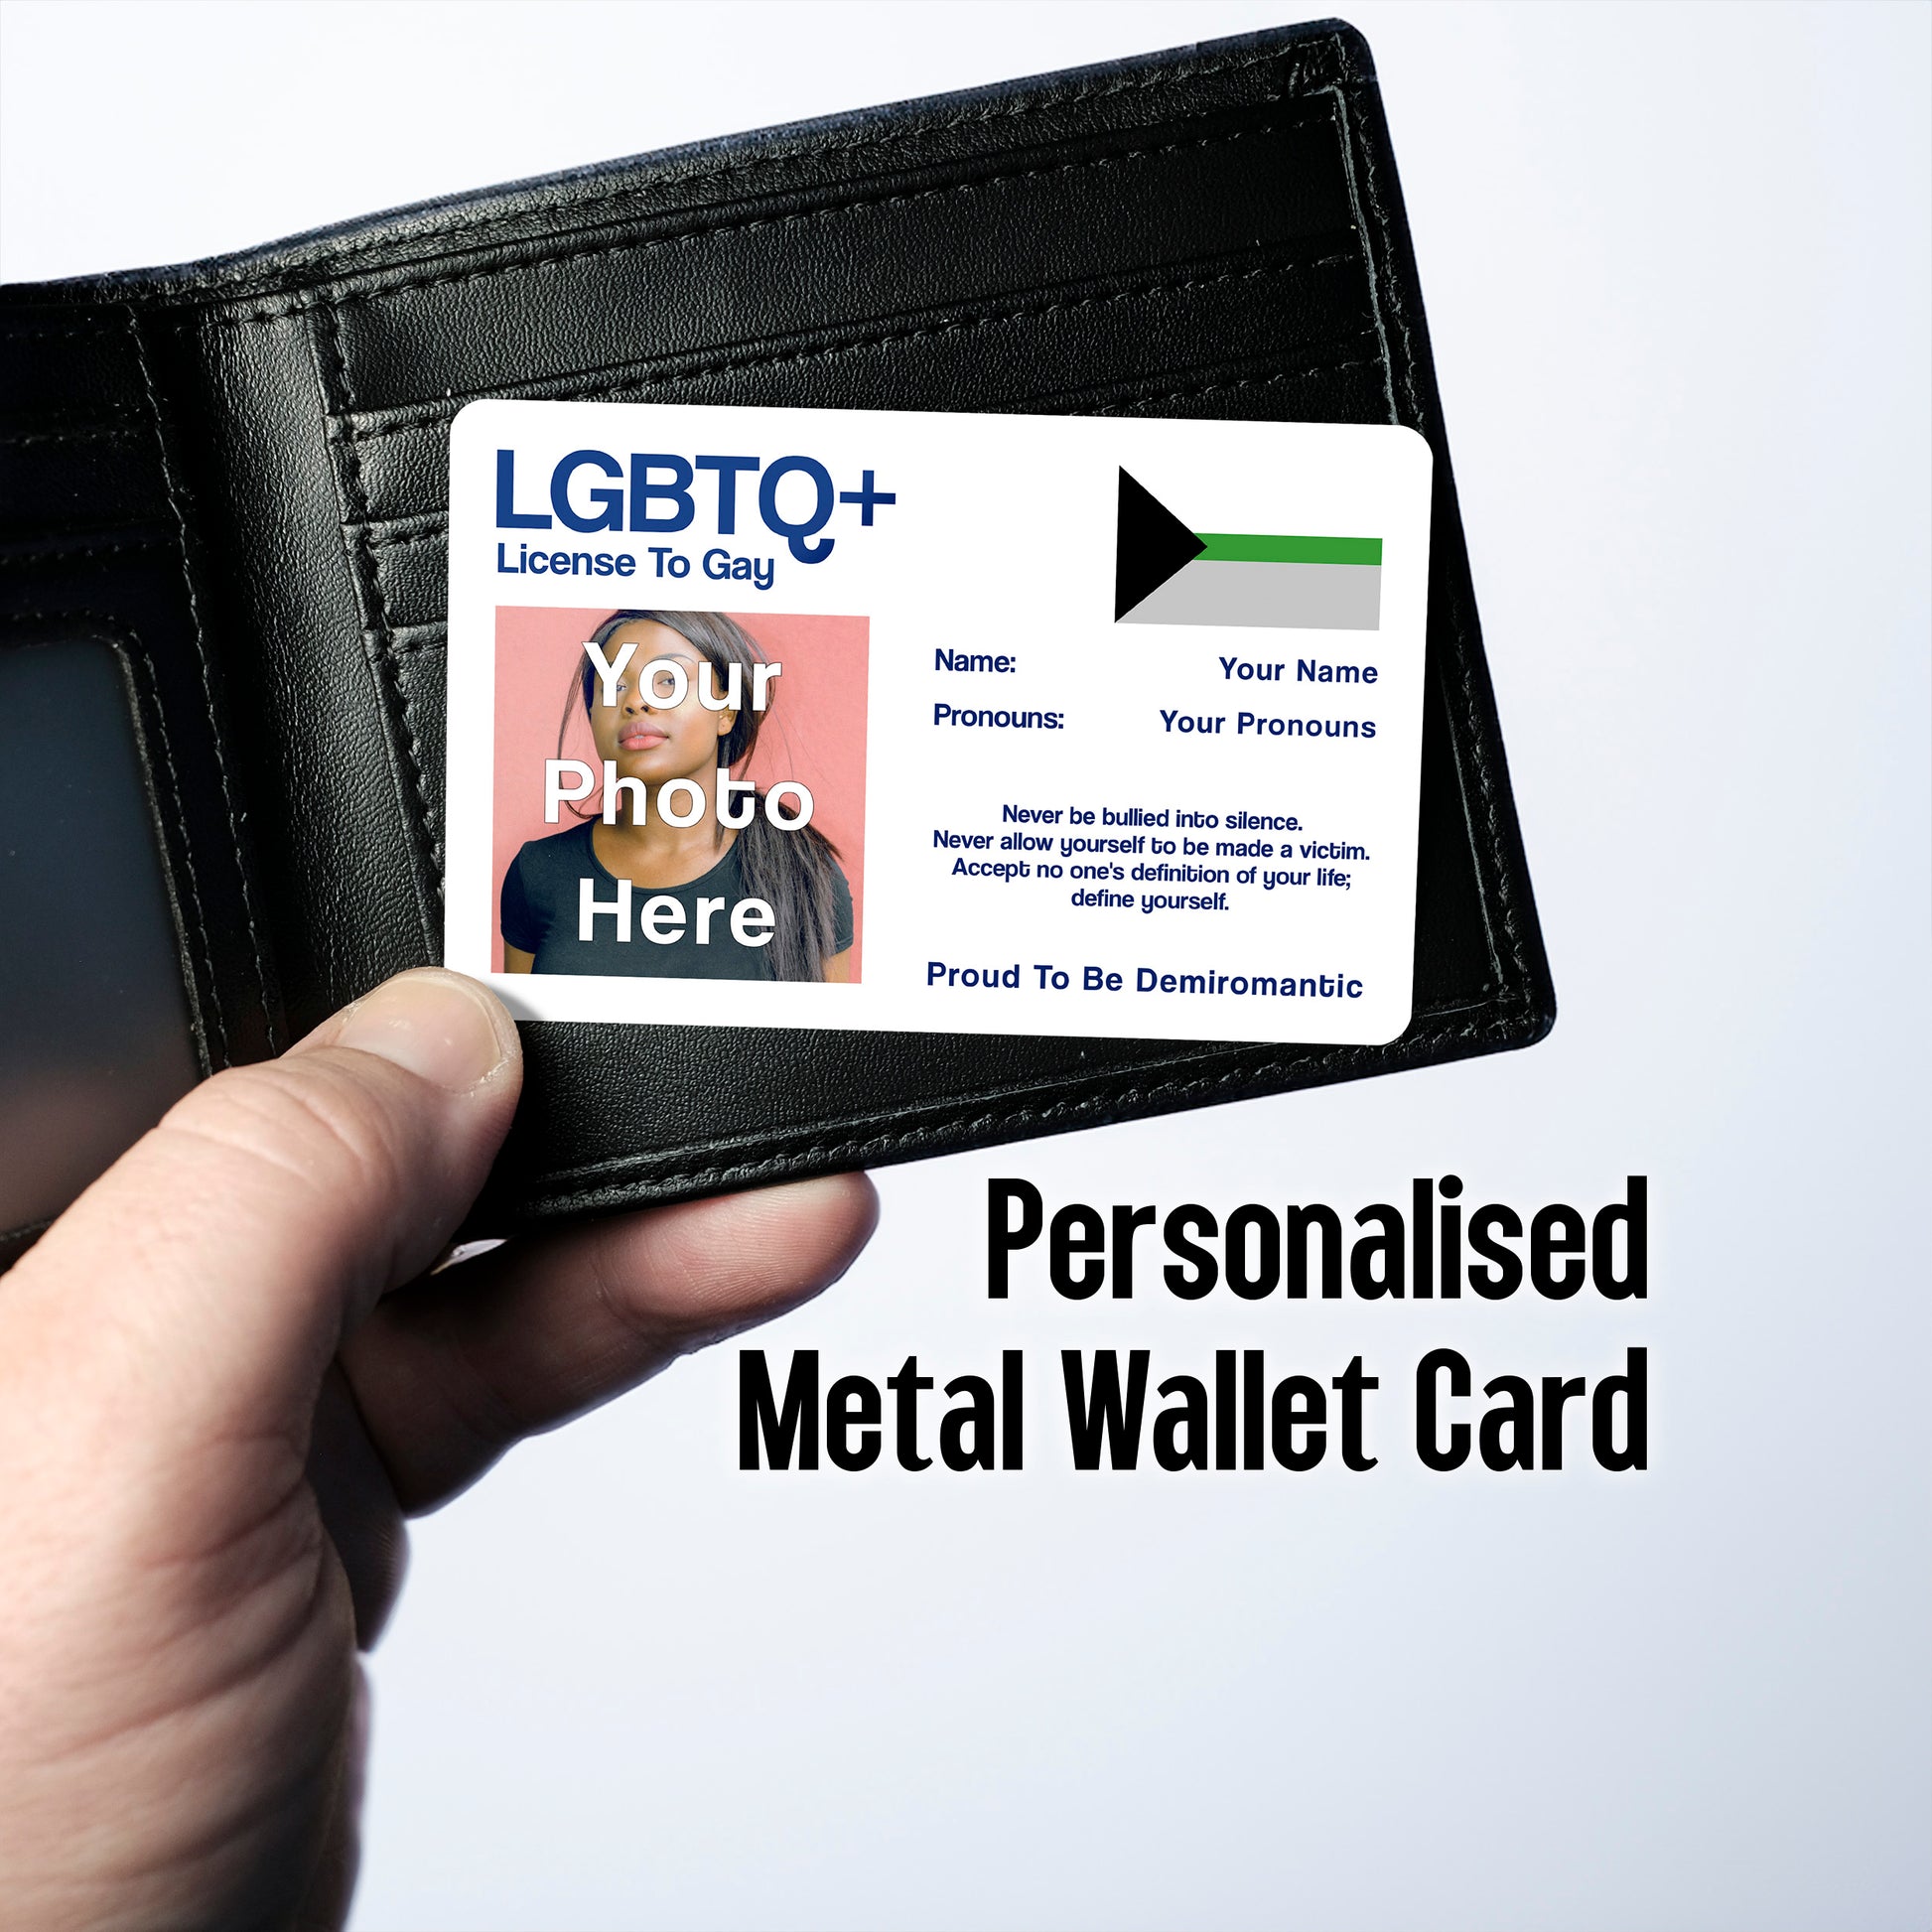 Demiromantic license to gay aluminium wallet card personalised with your name, pronouns and photo